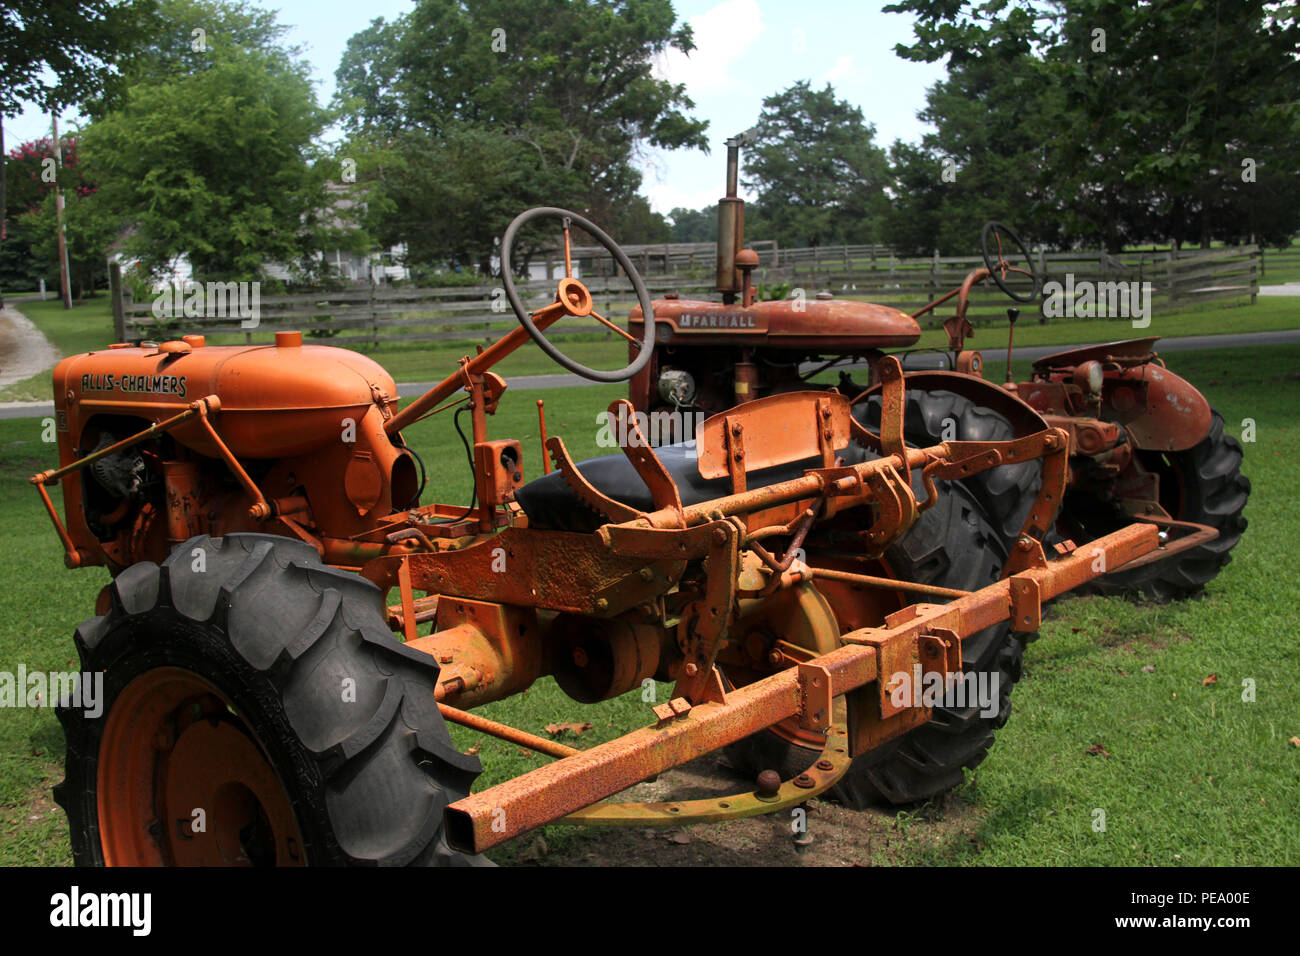 Tractors displayed at Farm and Forestry Museum at Chippokes Plantation, Virginia Stock Photo